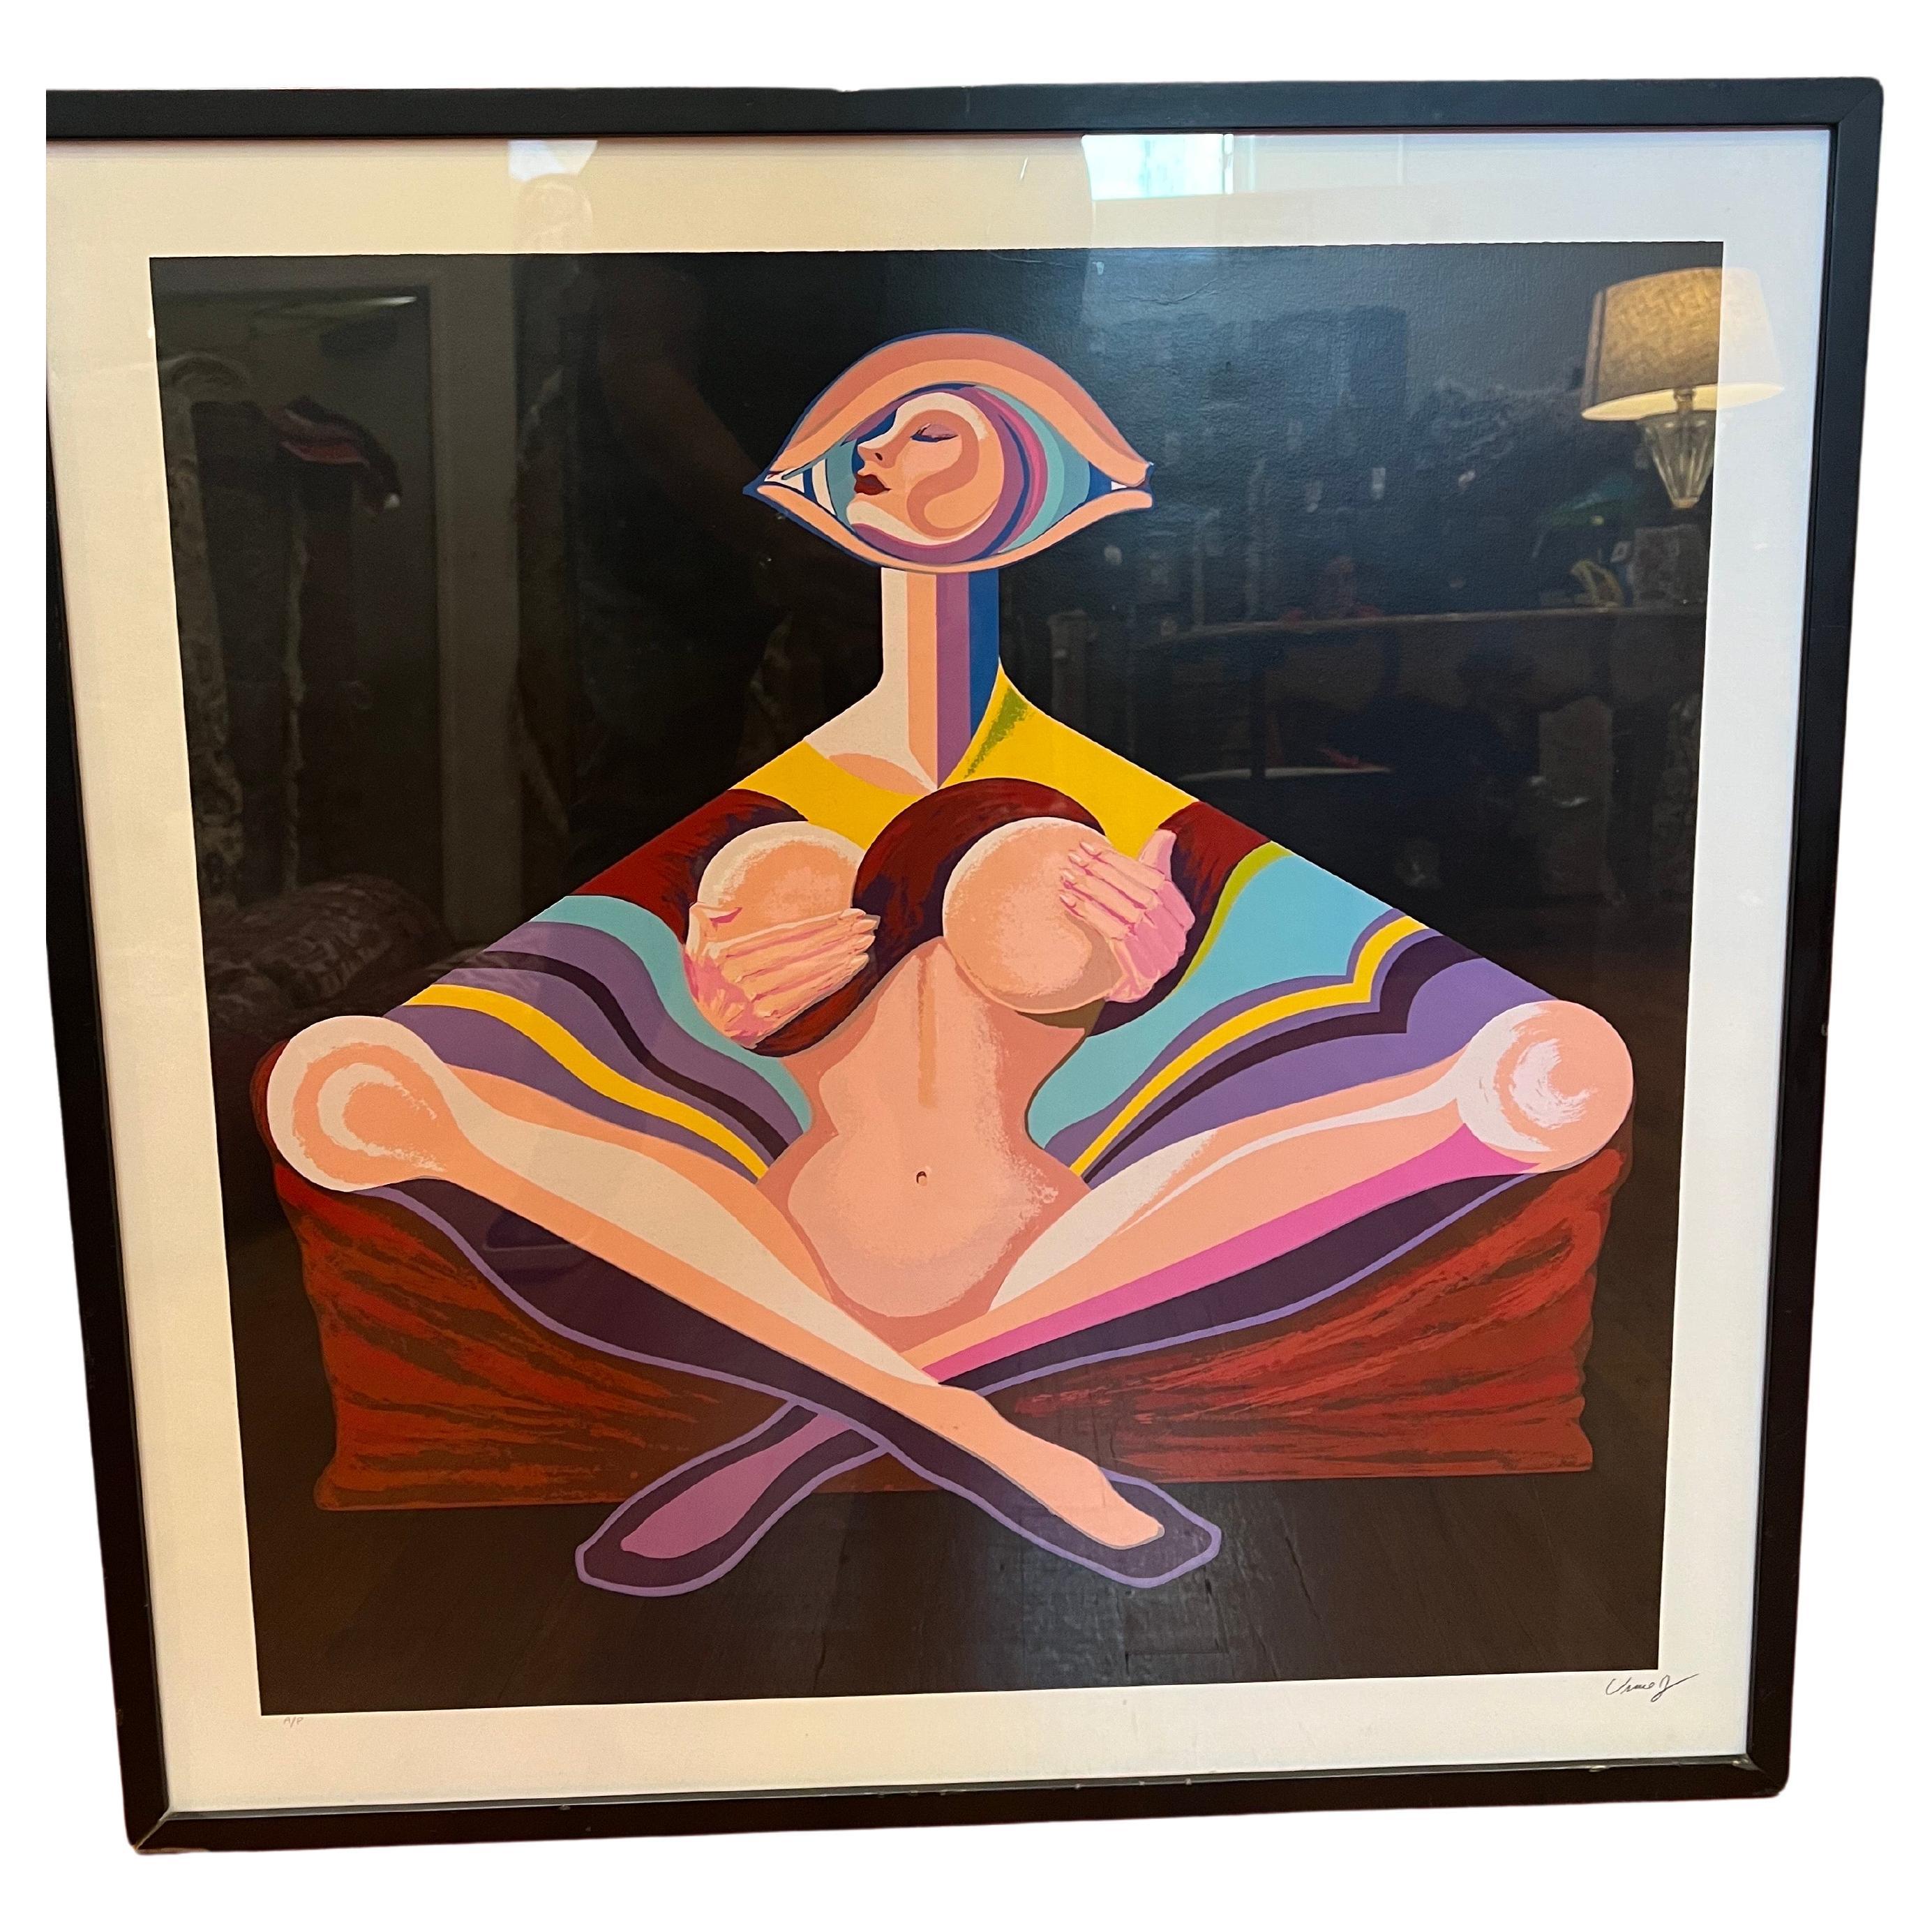 Beautiful  Art Deco style artist proof litho signed by Vince Jefferds, original frame with some scuffs and marks on the frame due to age the piece is signed with A/P and his signature the artist worked for Walt Disney for many years and has auction